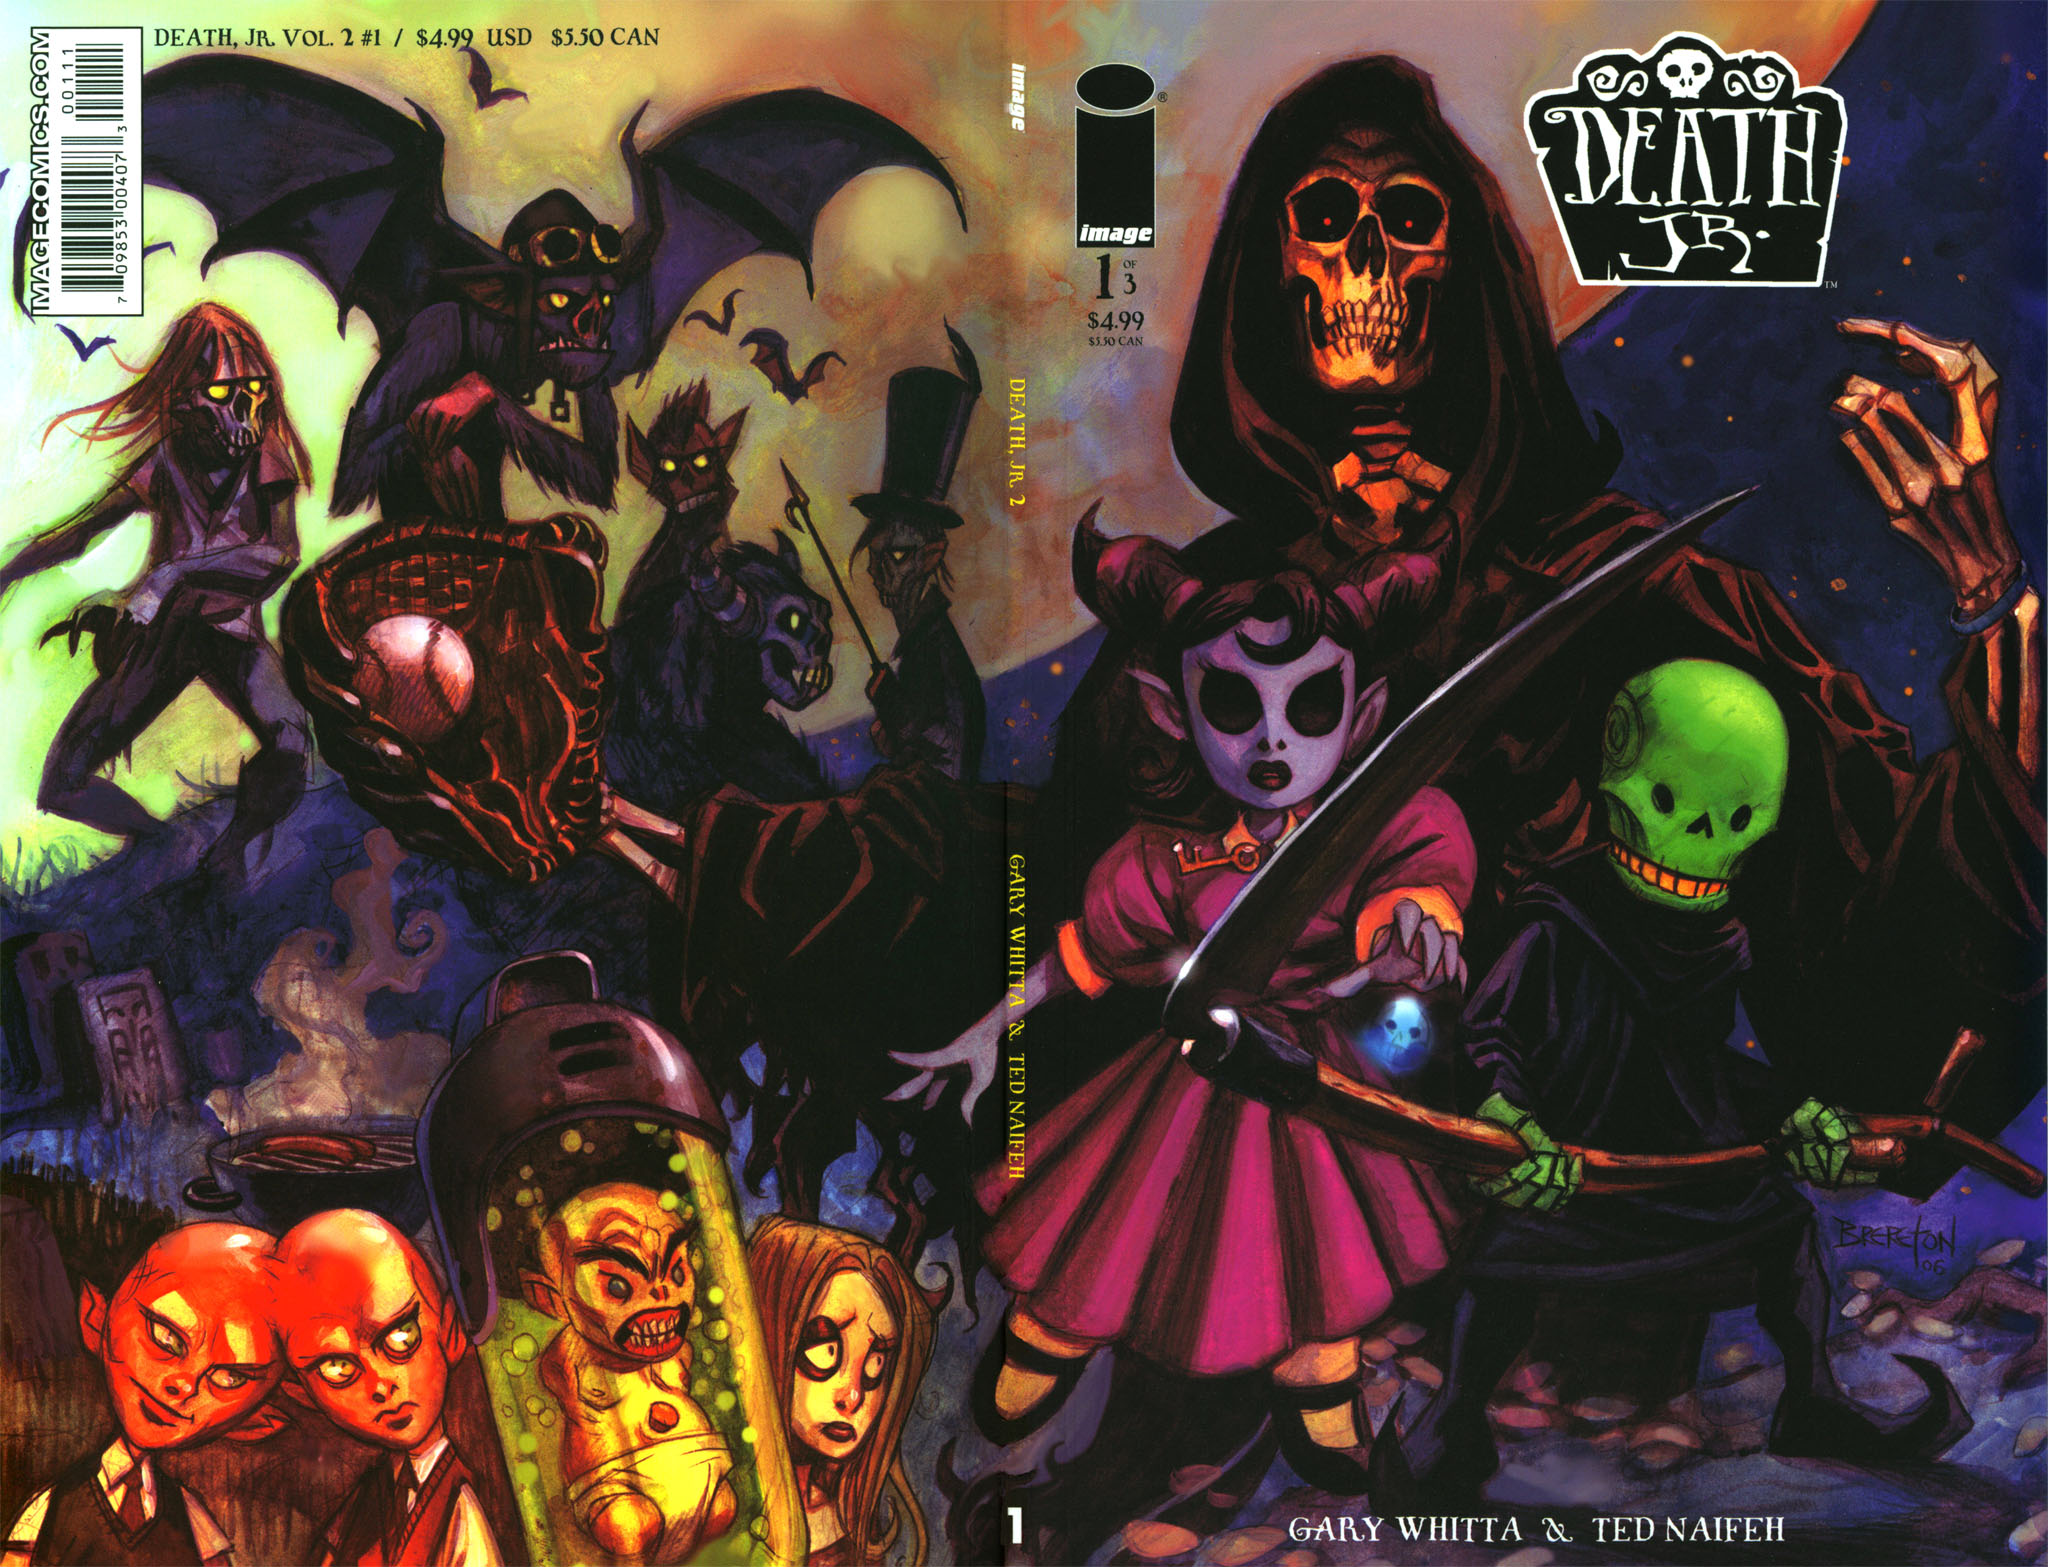 Read online Death Jr. (2006) comic -  Issue #1 - 1